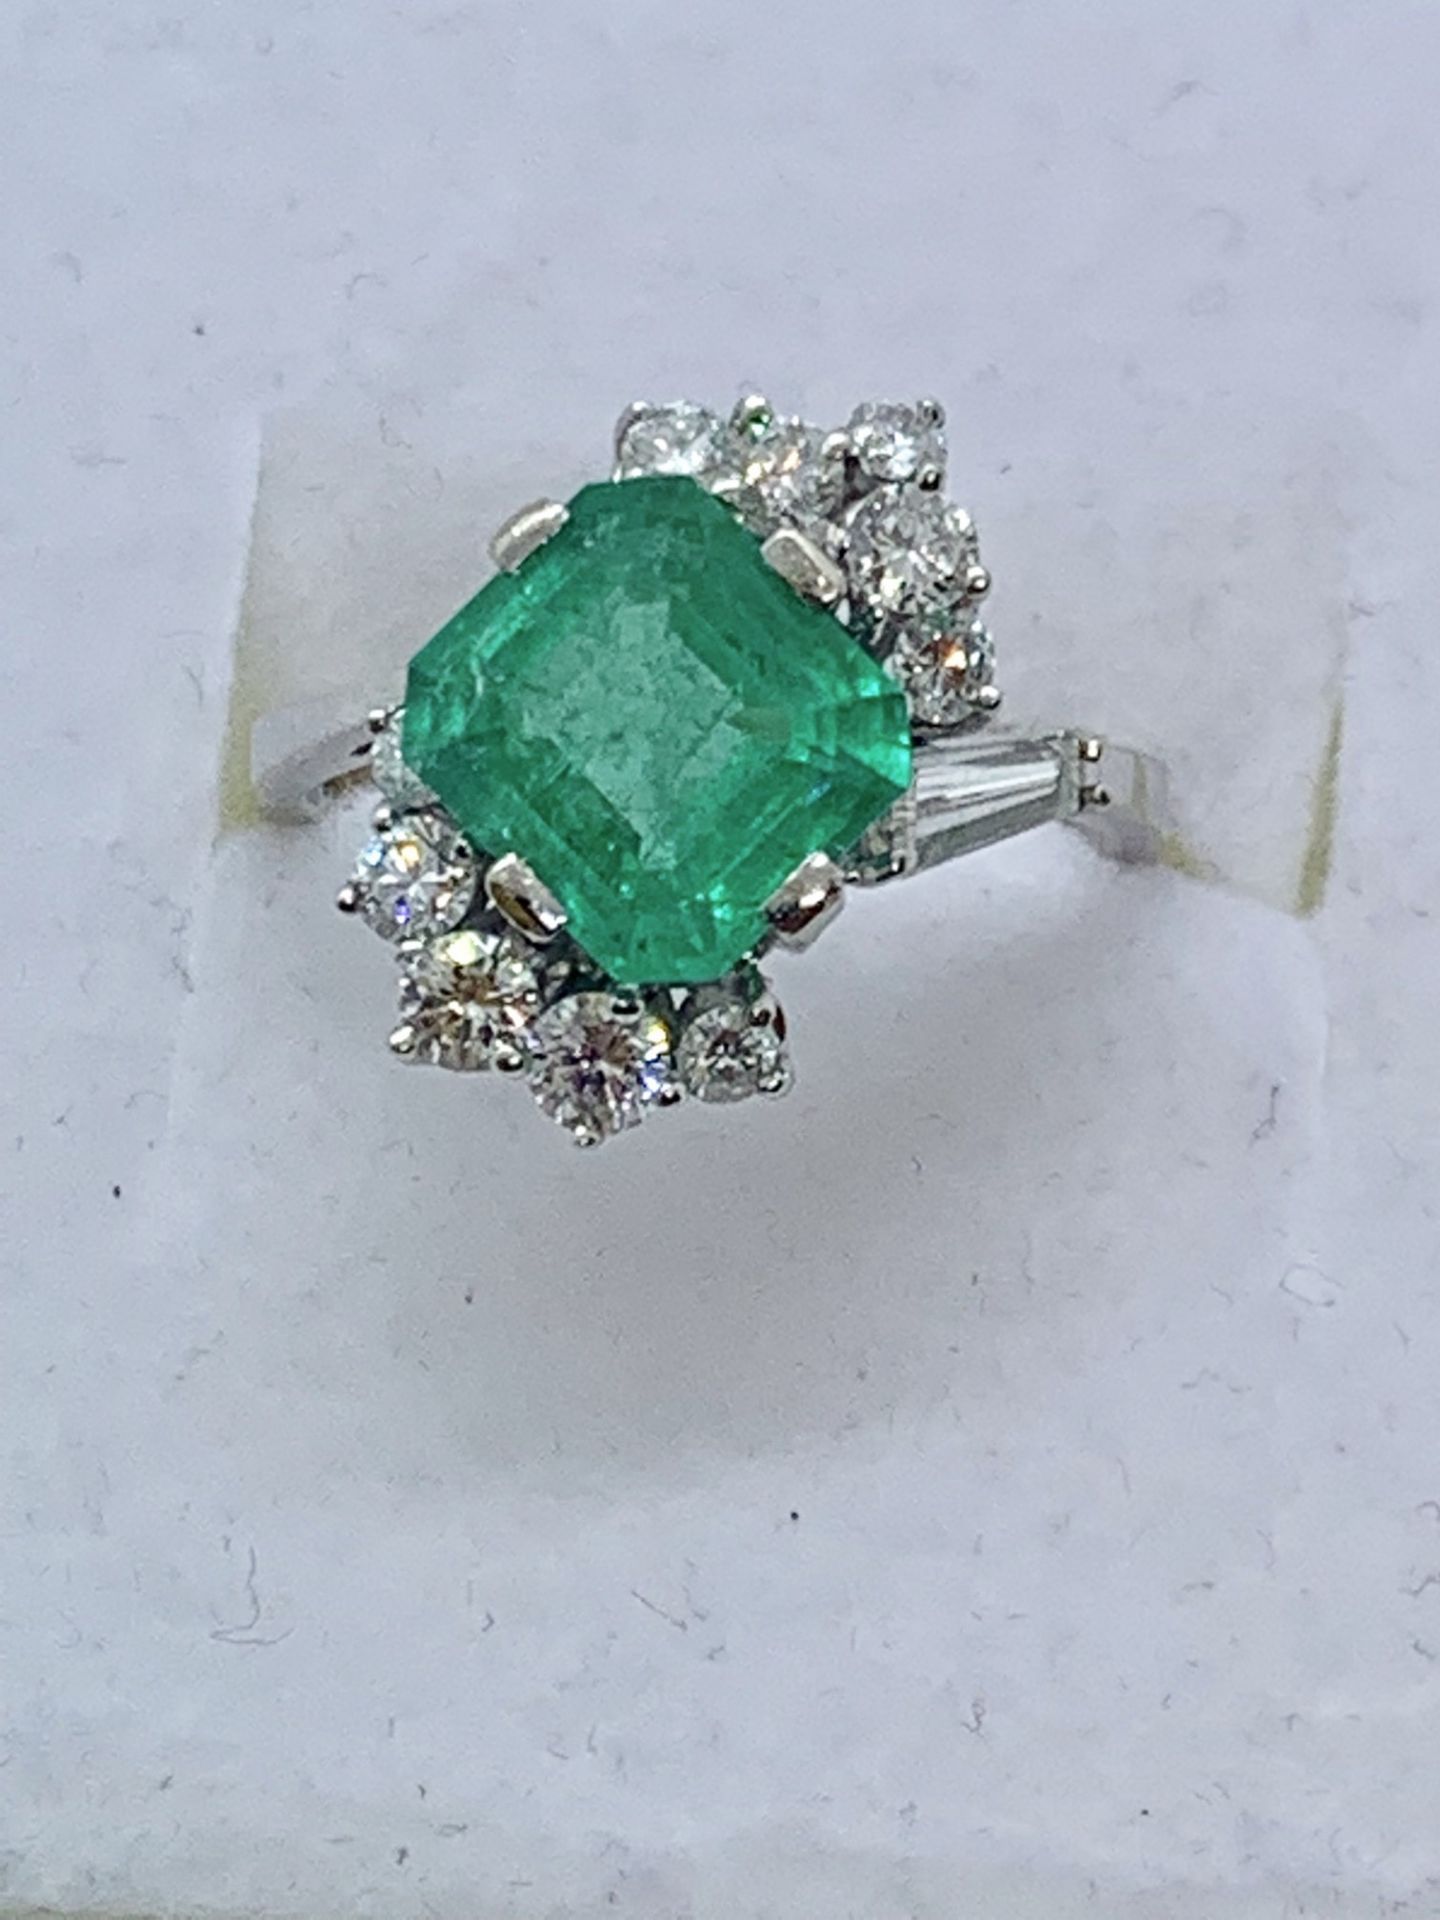 14ct GOLD 2.5ct APPROX EMERALD & 0.80ct DIAMOND RING - Image 2 of 4